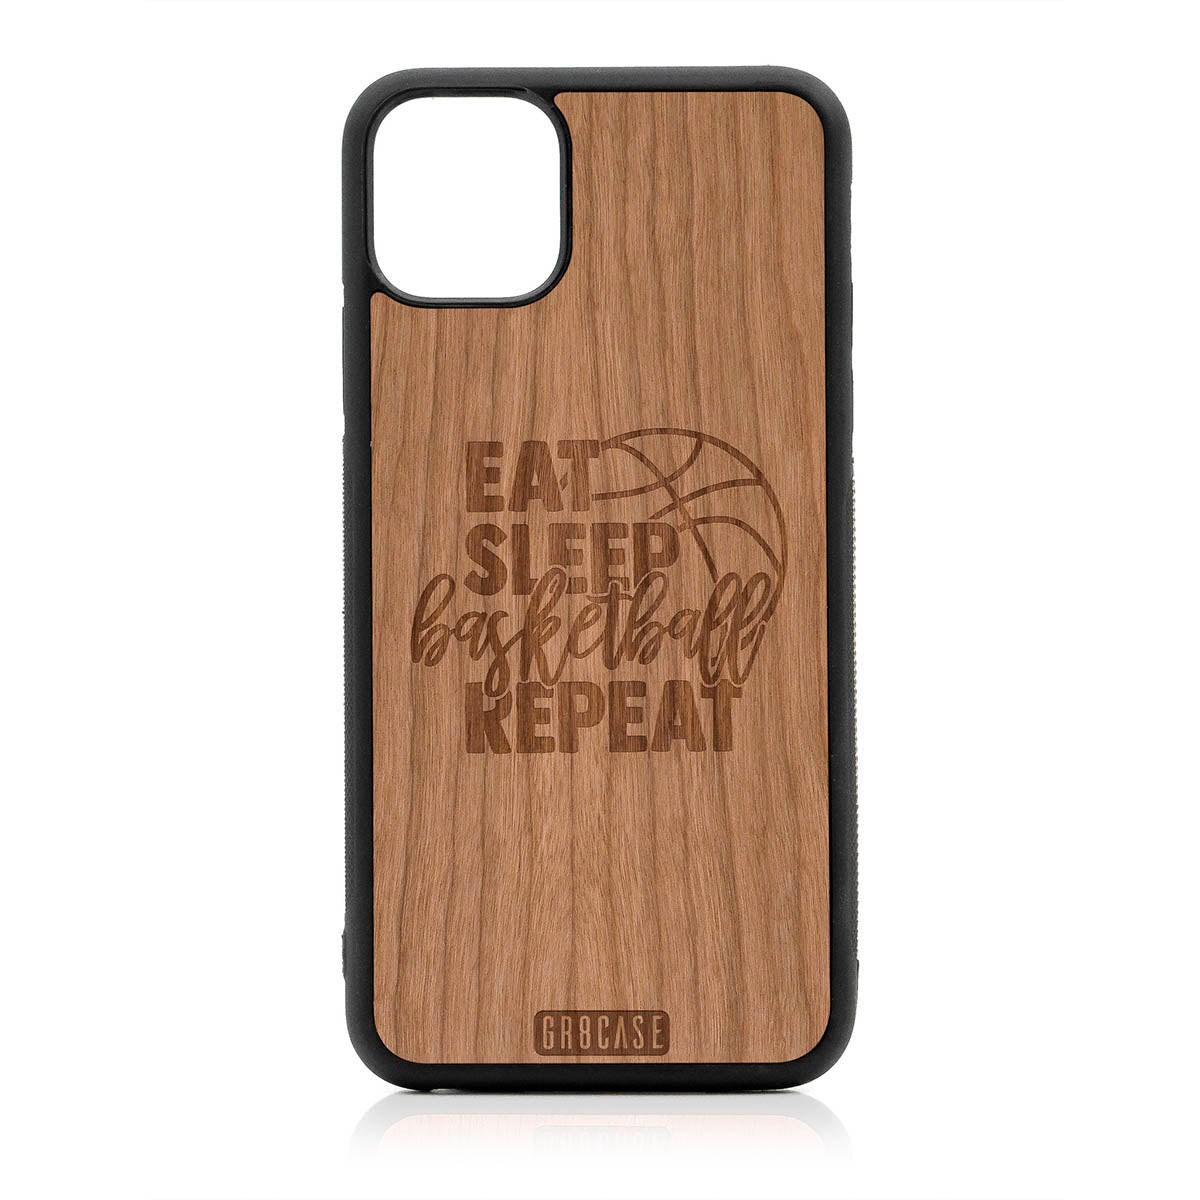 Eat Sleep Basketball Repeat Design Wood Case For iPhone 11 Pro Max